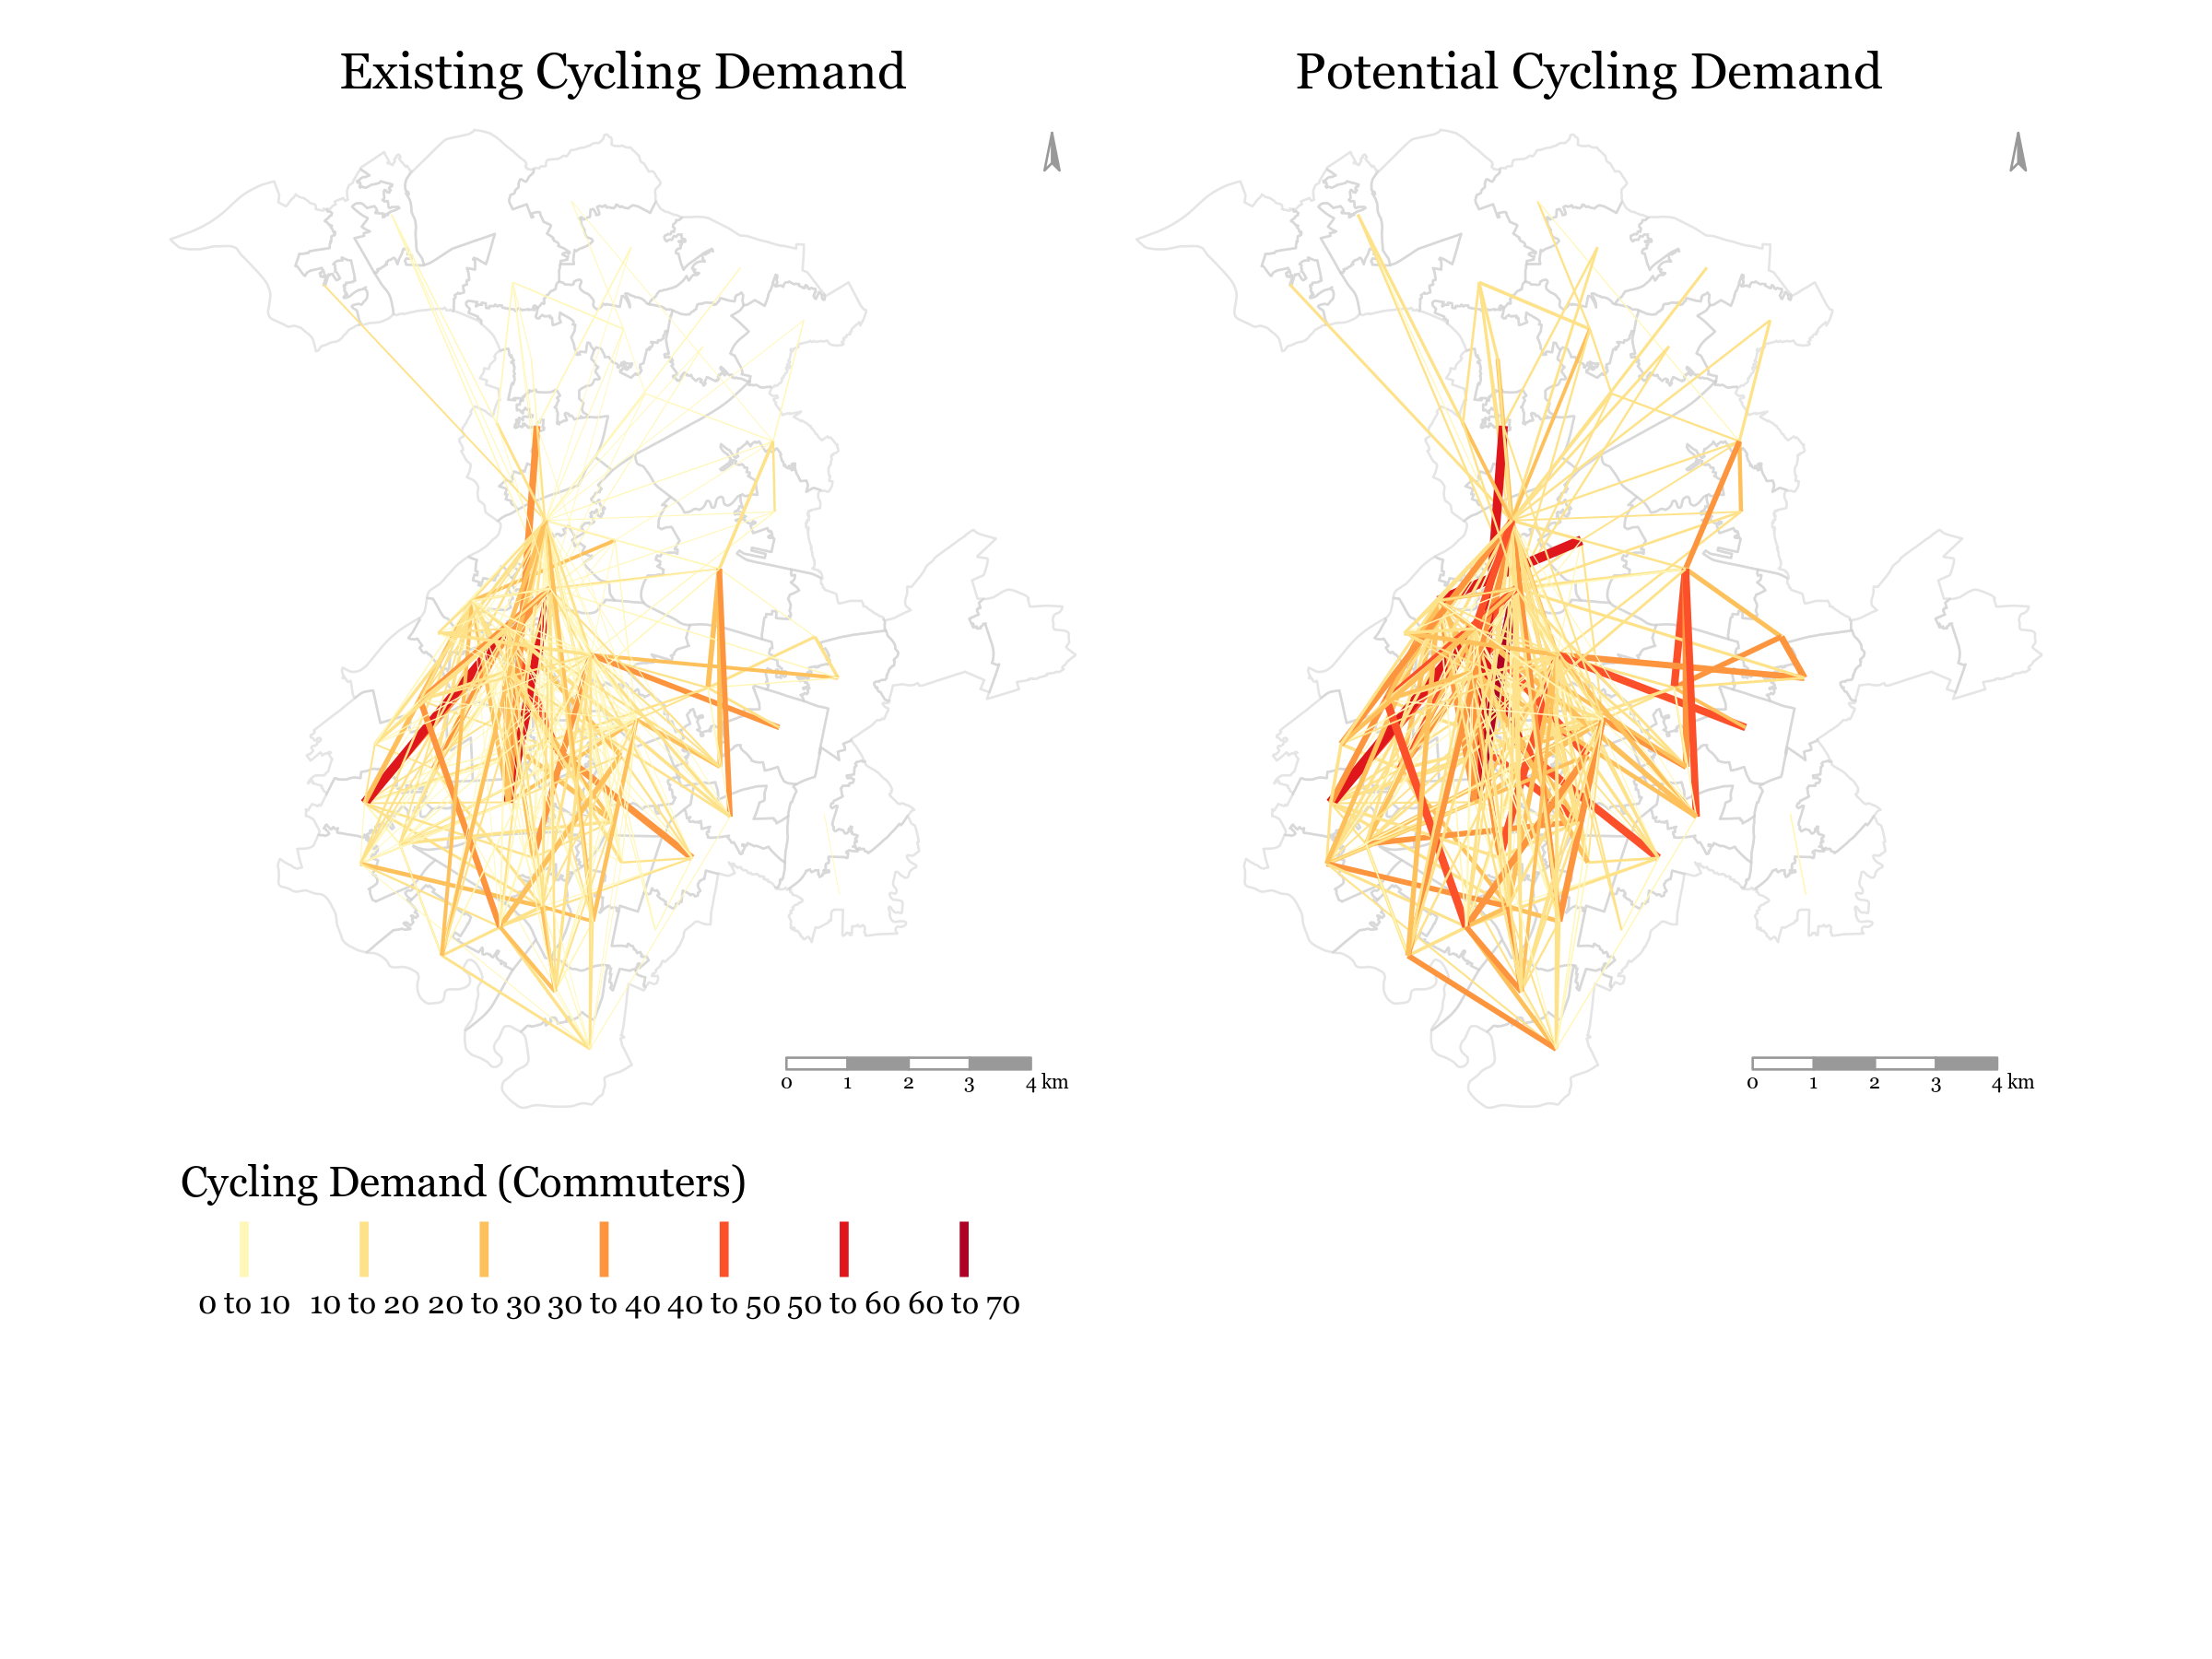 Current and potential cycling demand